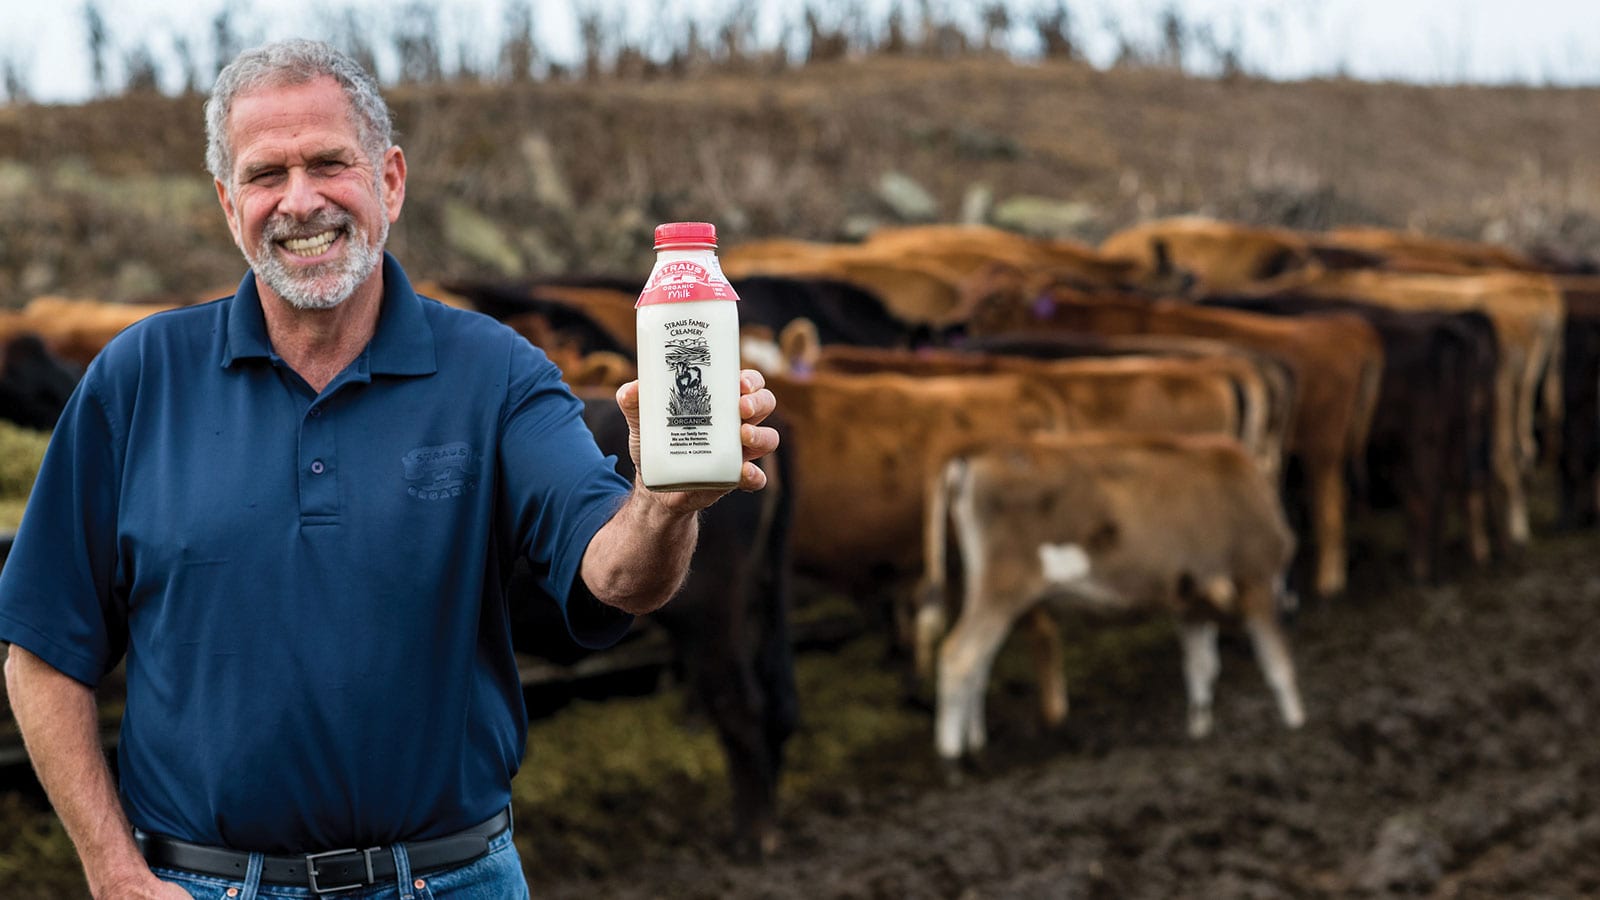 Founder/CEO Albert Straus holding a bottle of Straus Family Creamery organic milk.